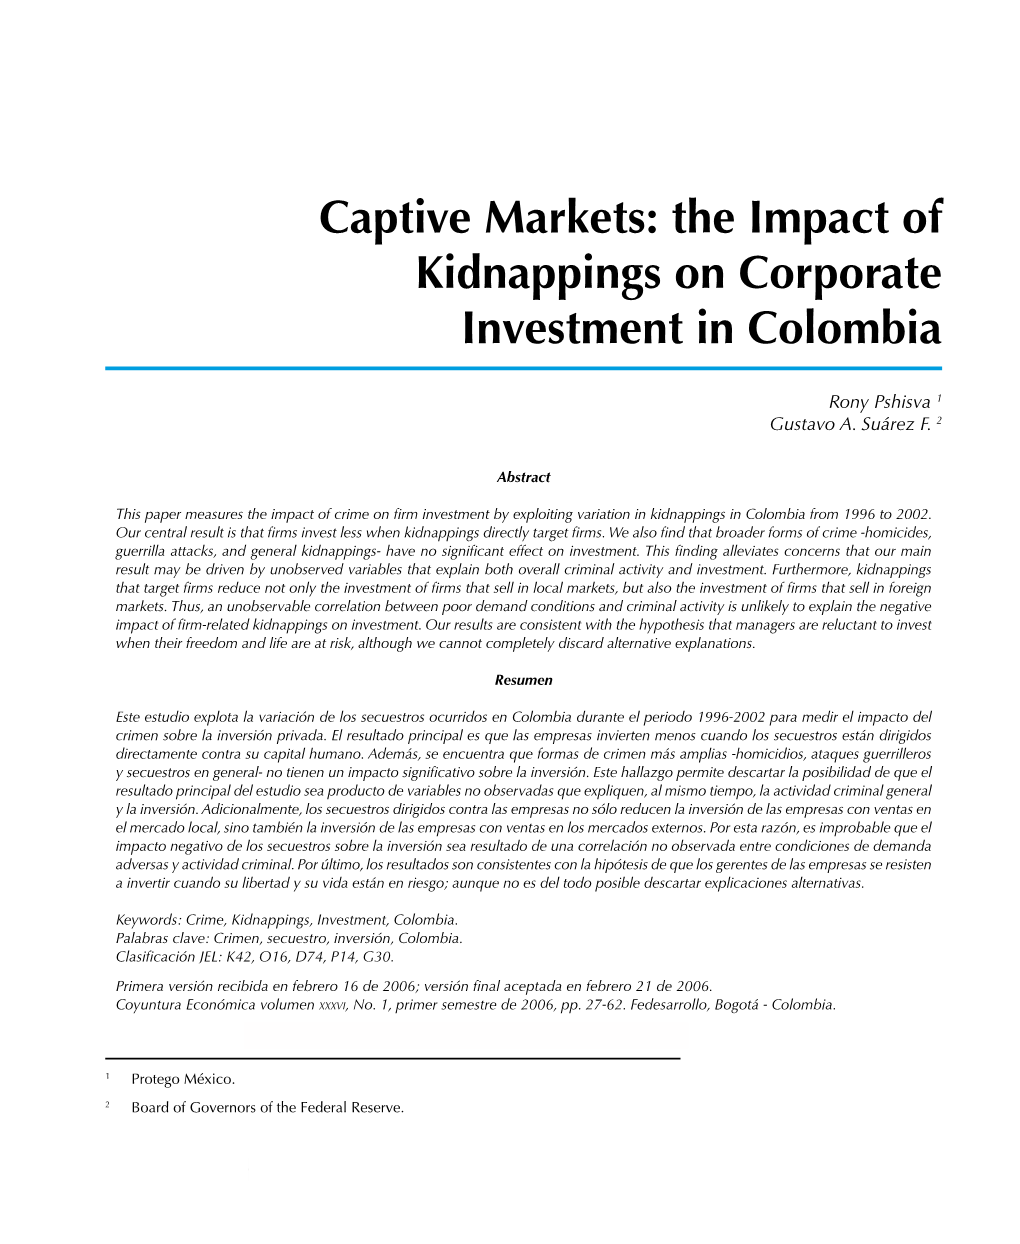 Captive Markets: the Impact of Kidnappings on Corporate Investment in Colombia